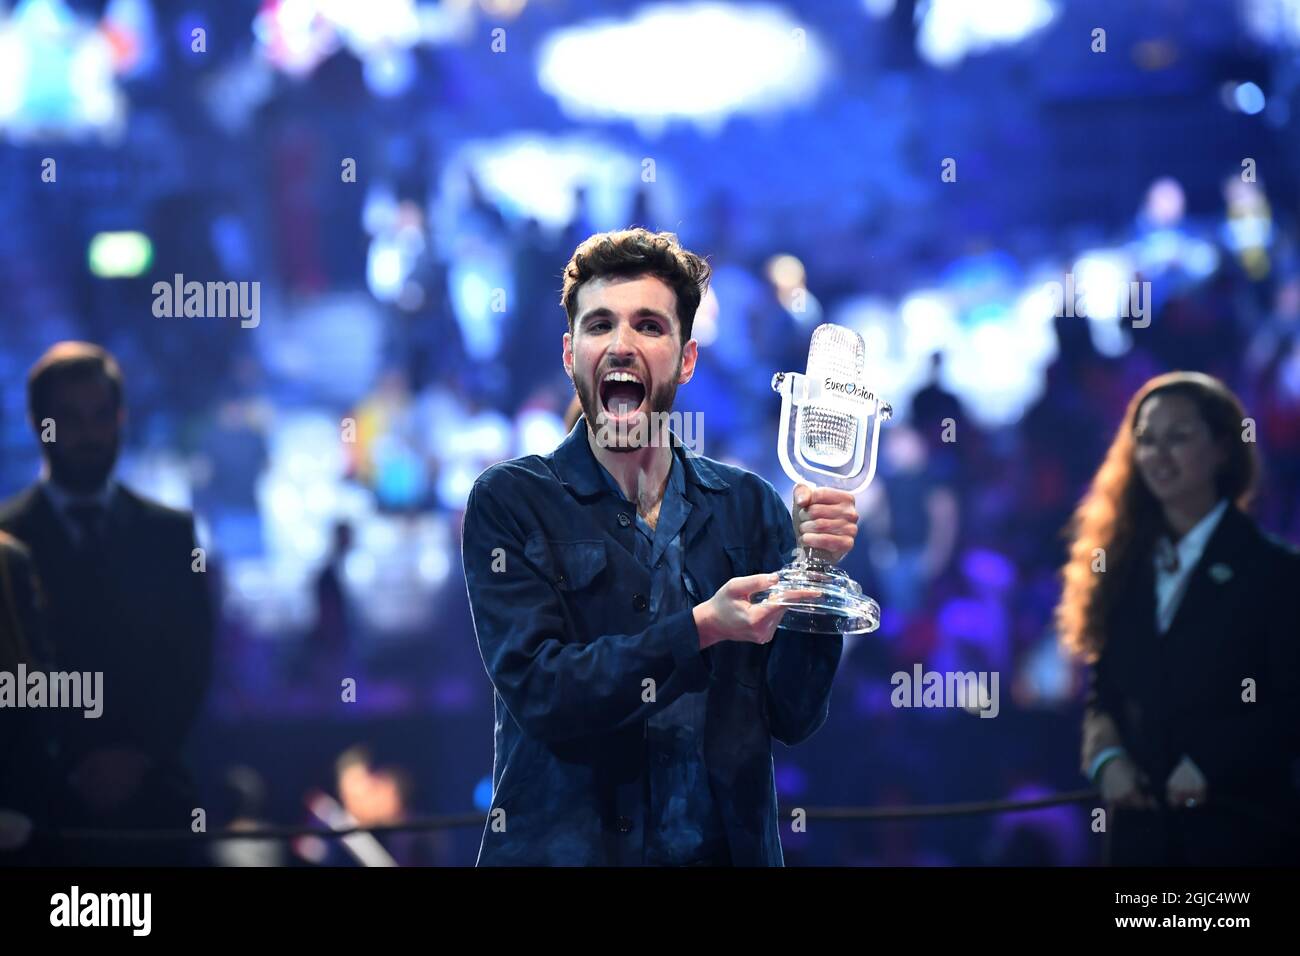 Duncan Laurence of the Netherlands is the winner of the Eurovision Song Contest 2019 in Tel Aviv, Israel, May 18, 2019 Photo: Henrik Montgomery / TT kod 10066  Stock Photo